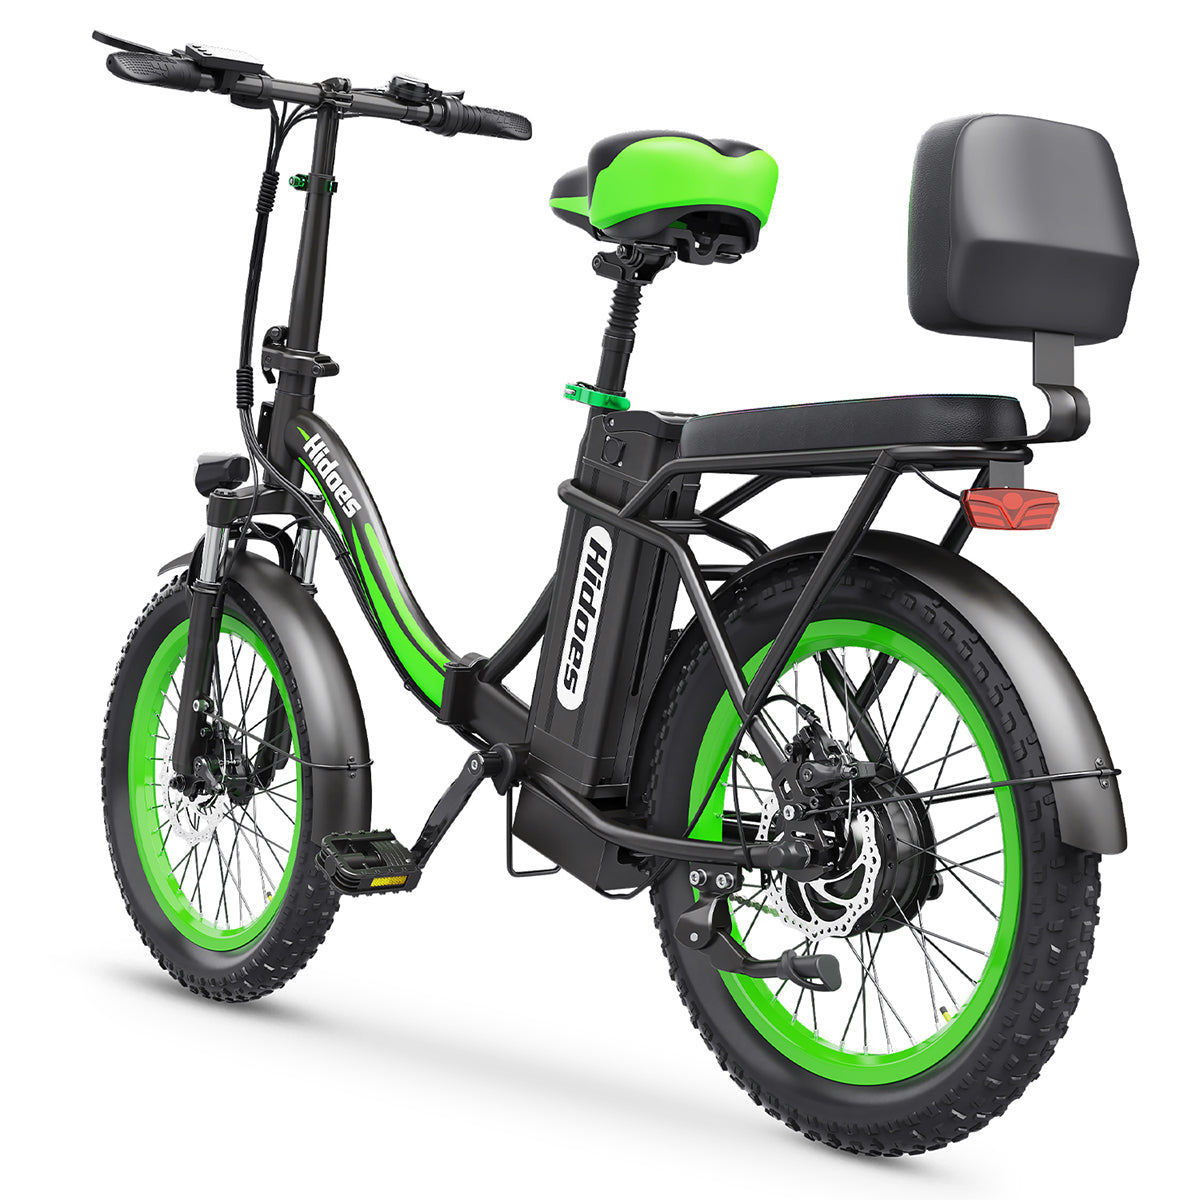 Hidoes C1 foldable e bicycle